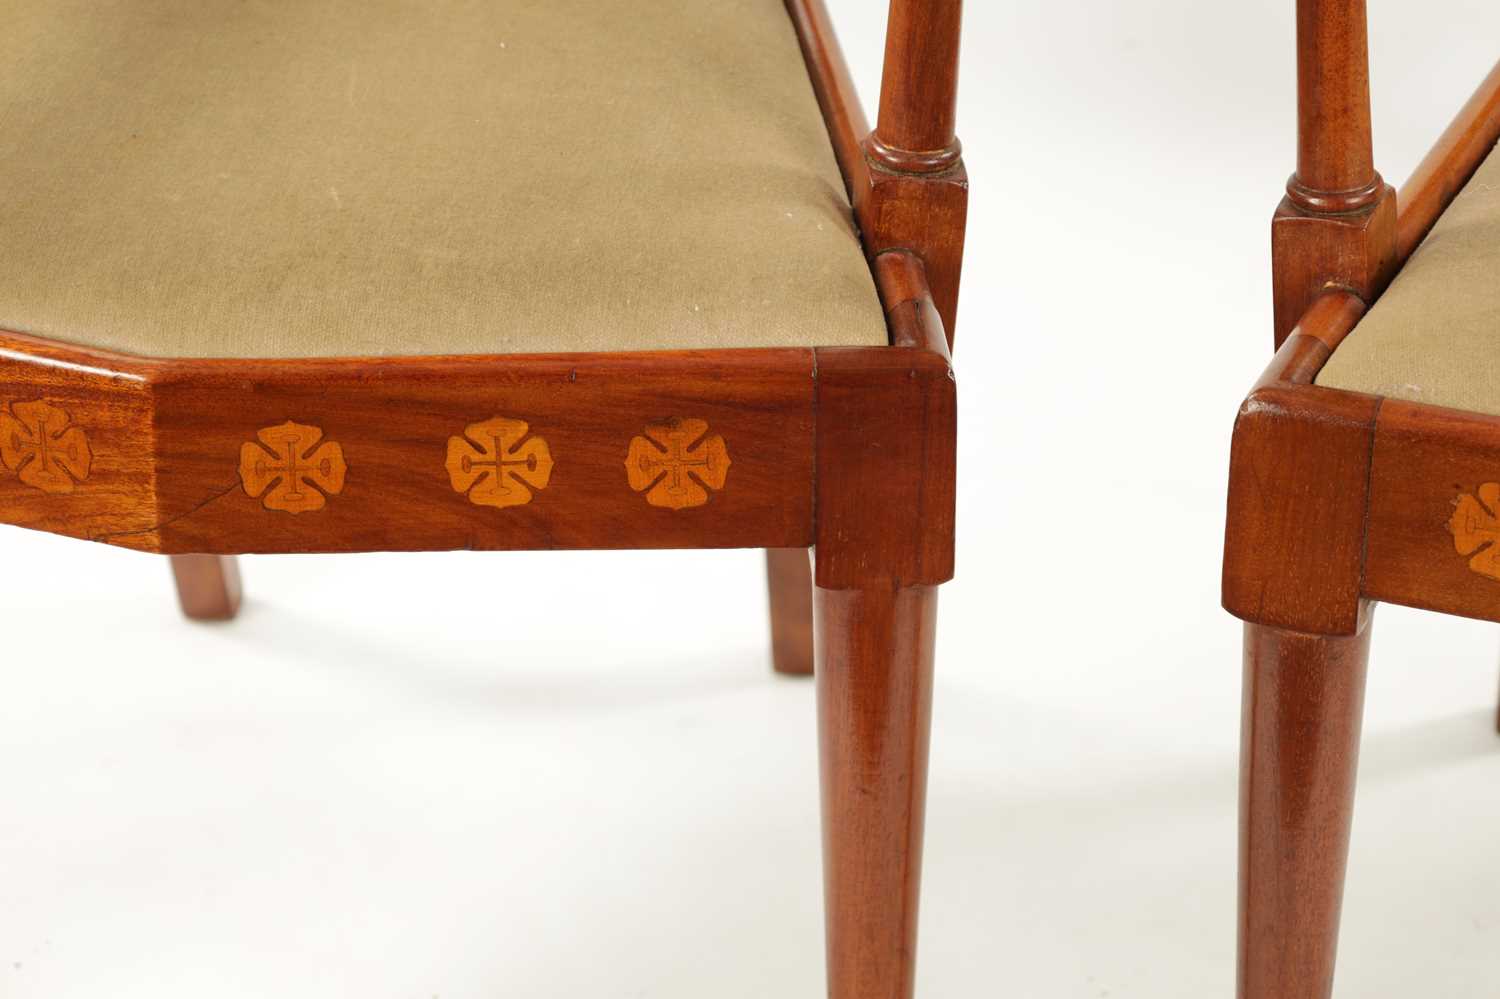 A PAIR OF INLAID MAHOGANY ART NOVEAU LIBERTY-STYLE UPHOLSTERED ARMCHAIRS - Image 6 of 11